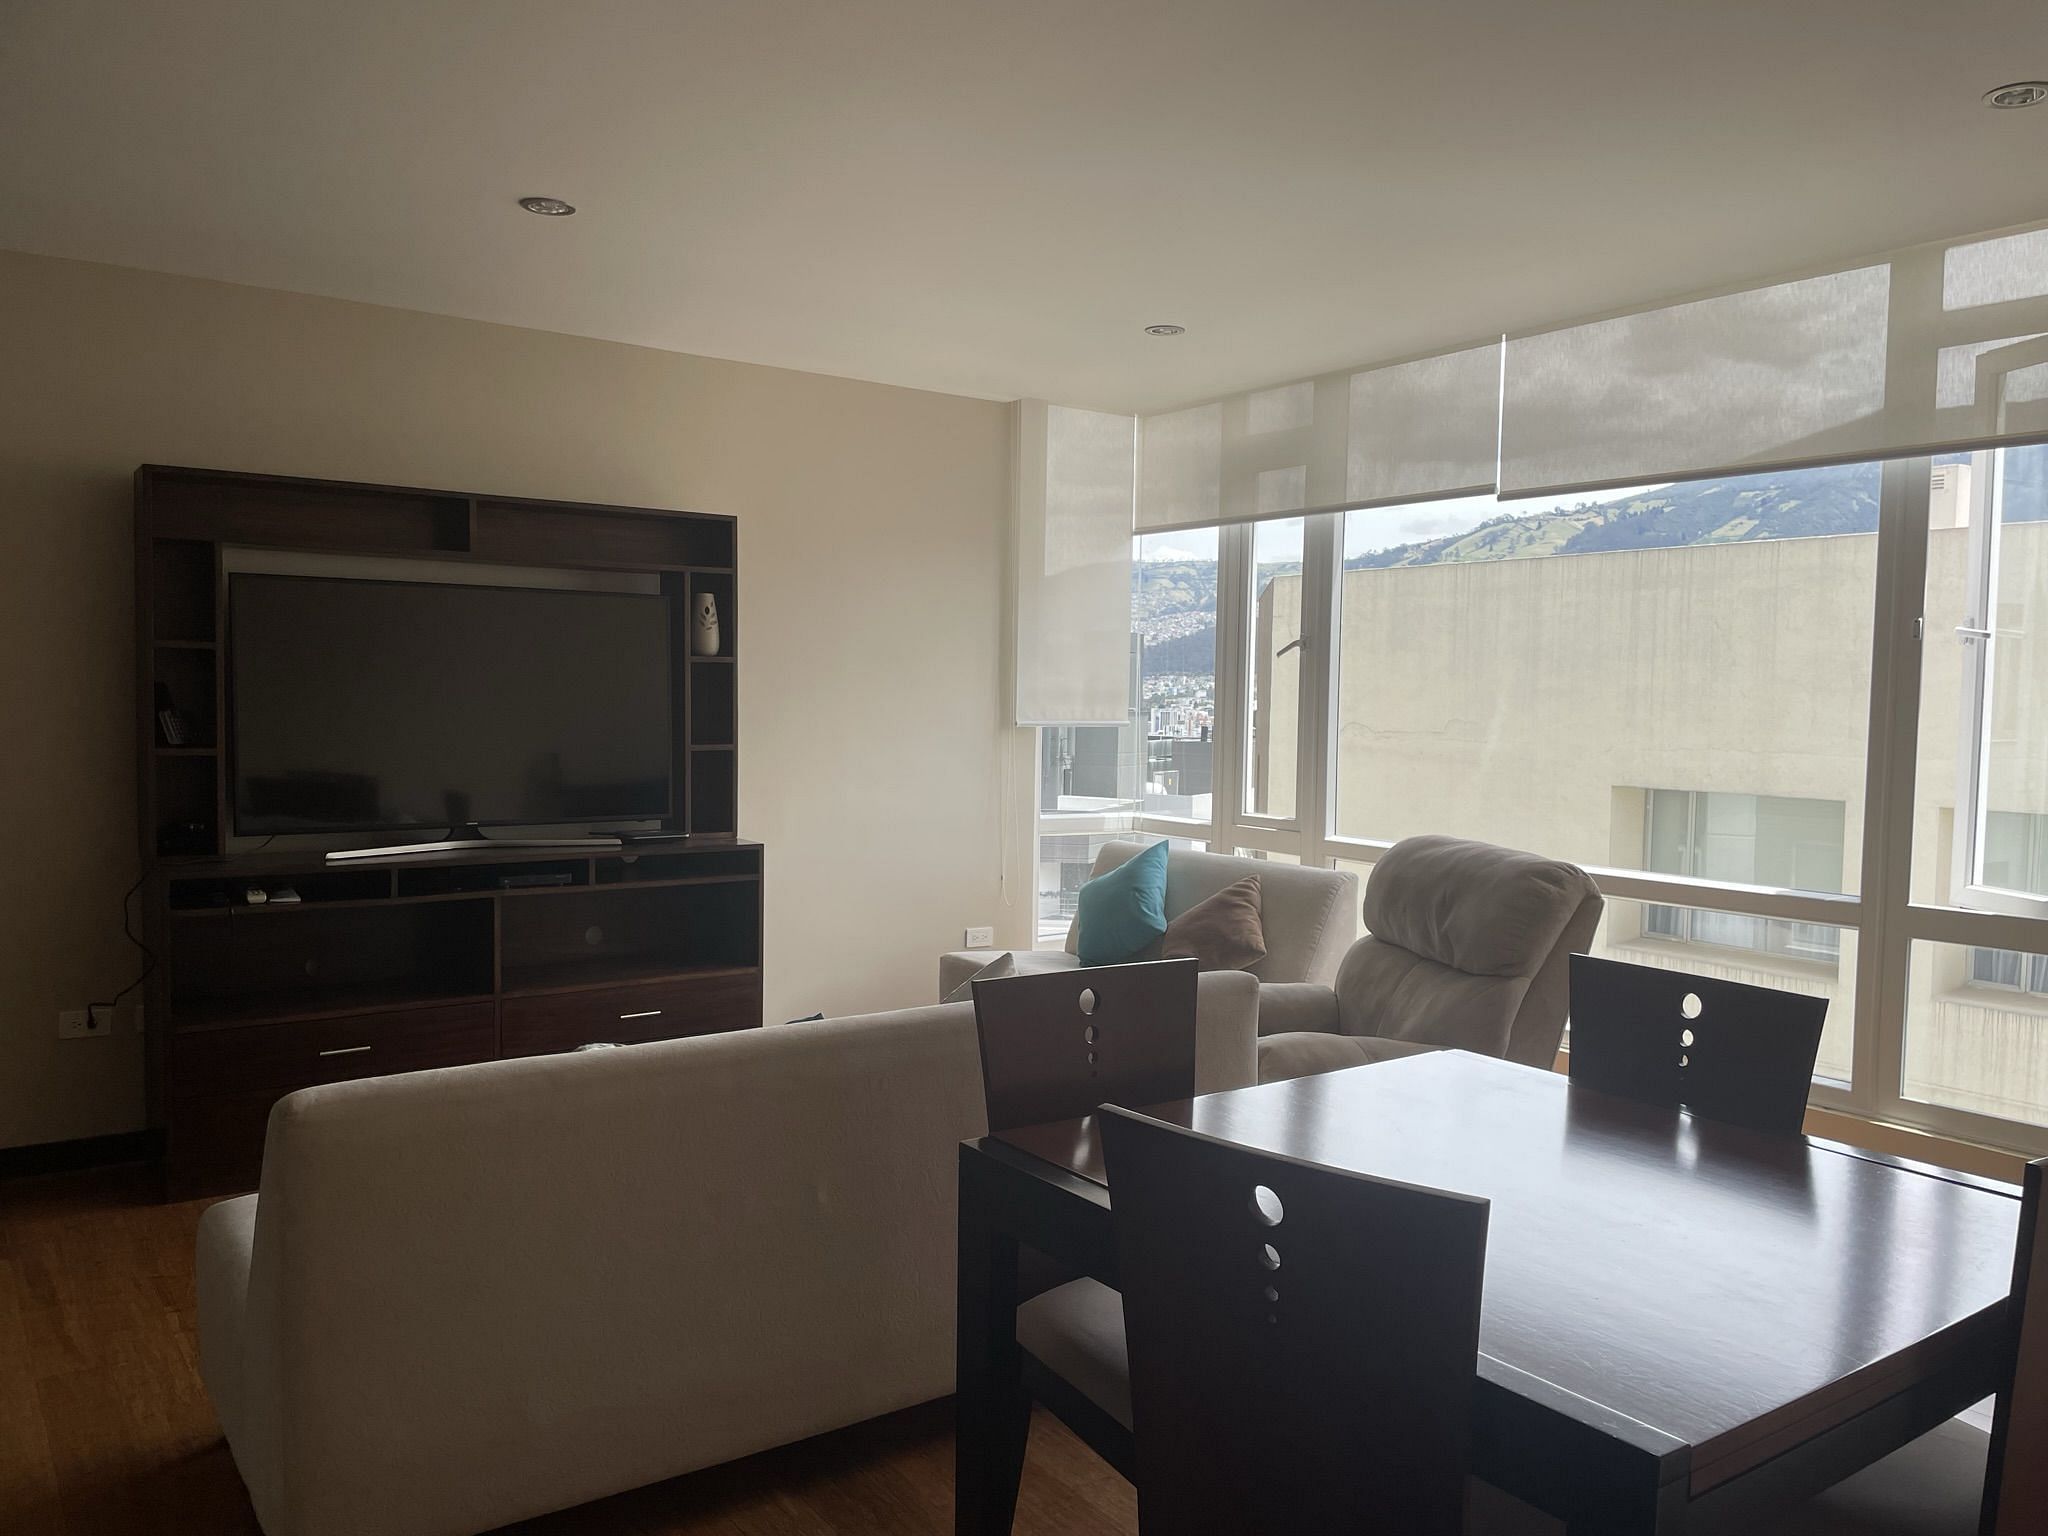 JWguest Apartment at Quito, Pichincha | Comfortable and complete department in Quito | Jwbnb no brobnb 4